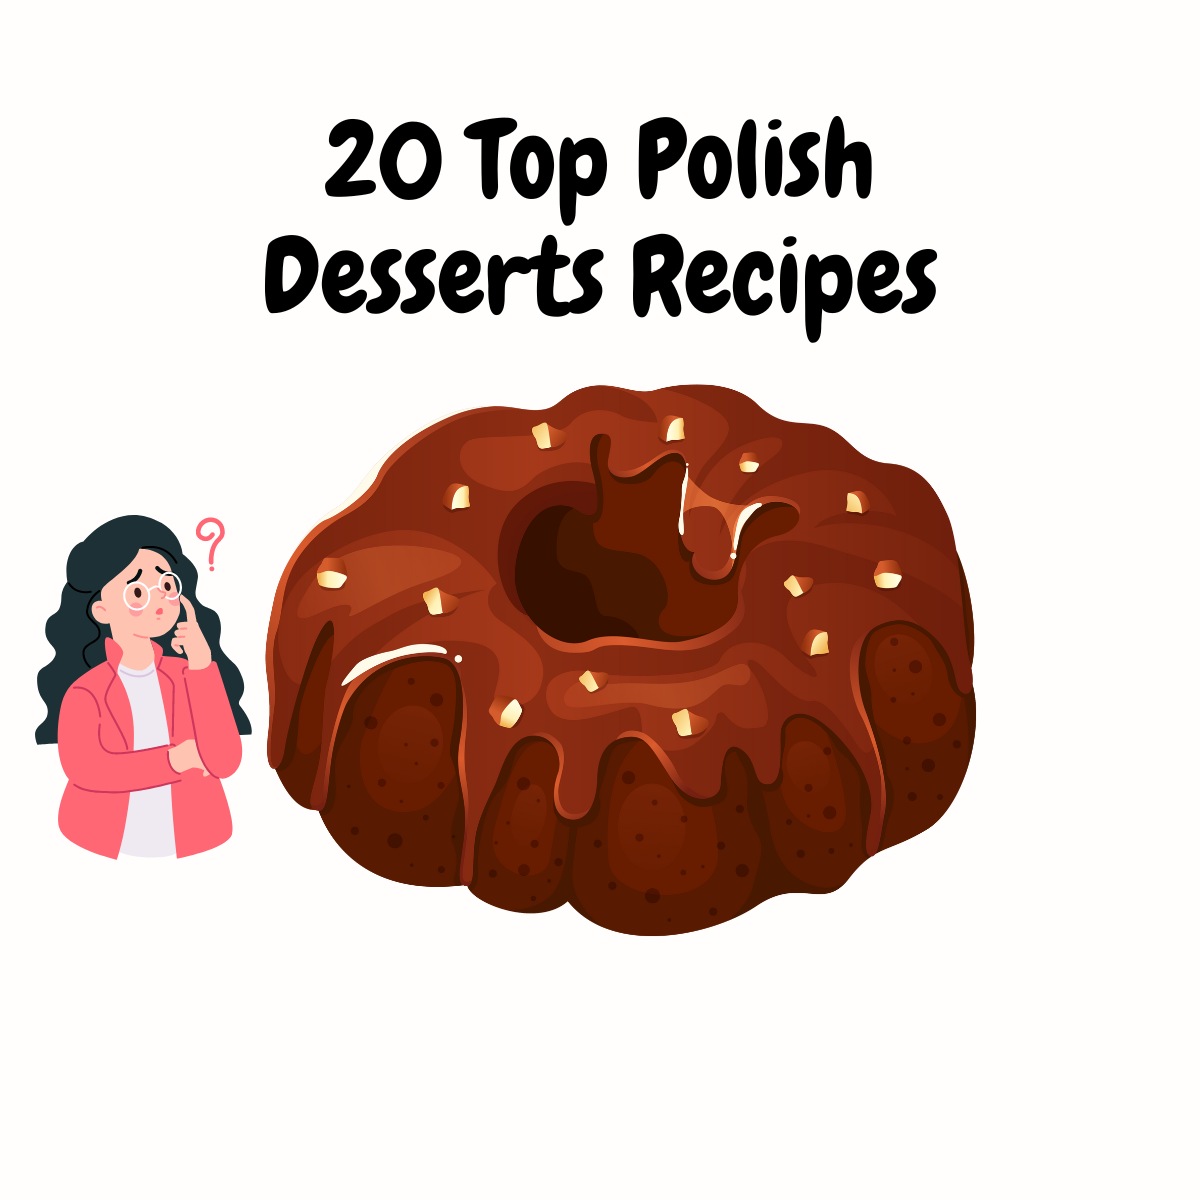 Polish Desserts Recipes featured image | Girl Meets Food